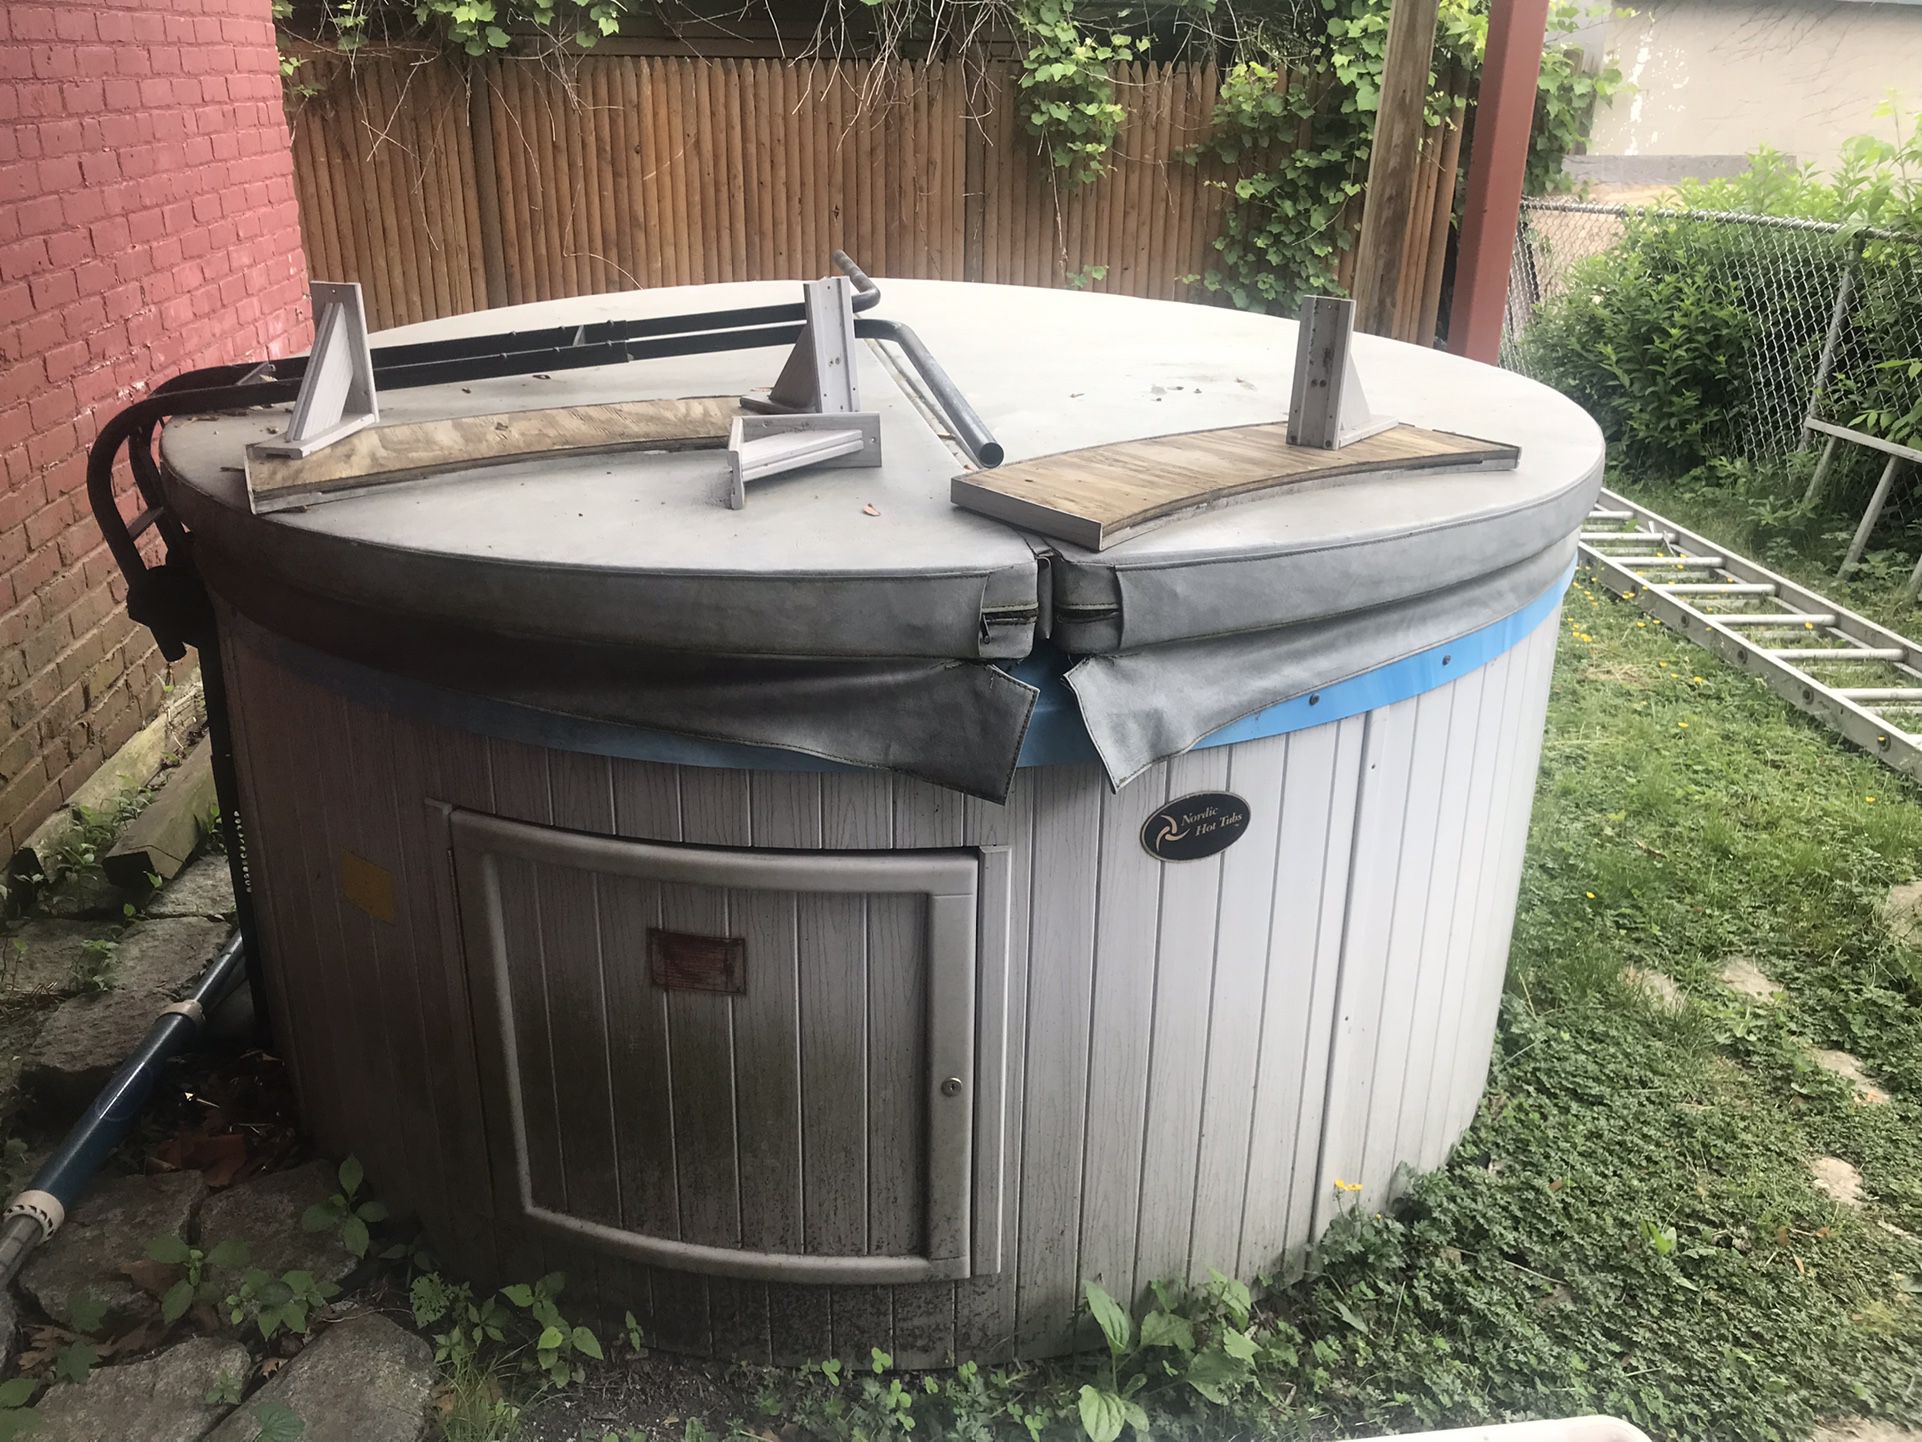 Nordic Hot Tub 7’ Diameter  Took Out Of Service 5 Years Ago